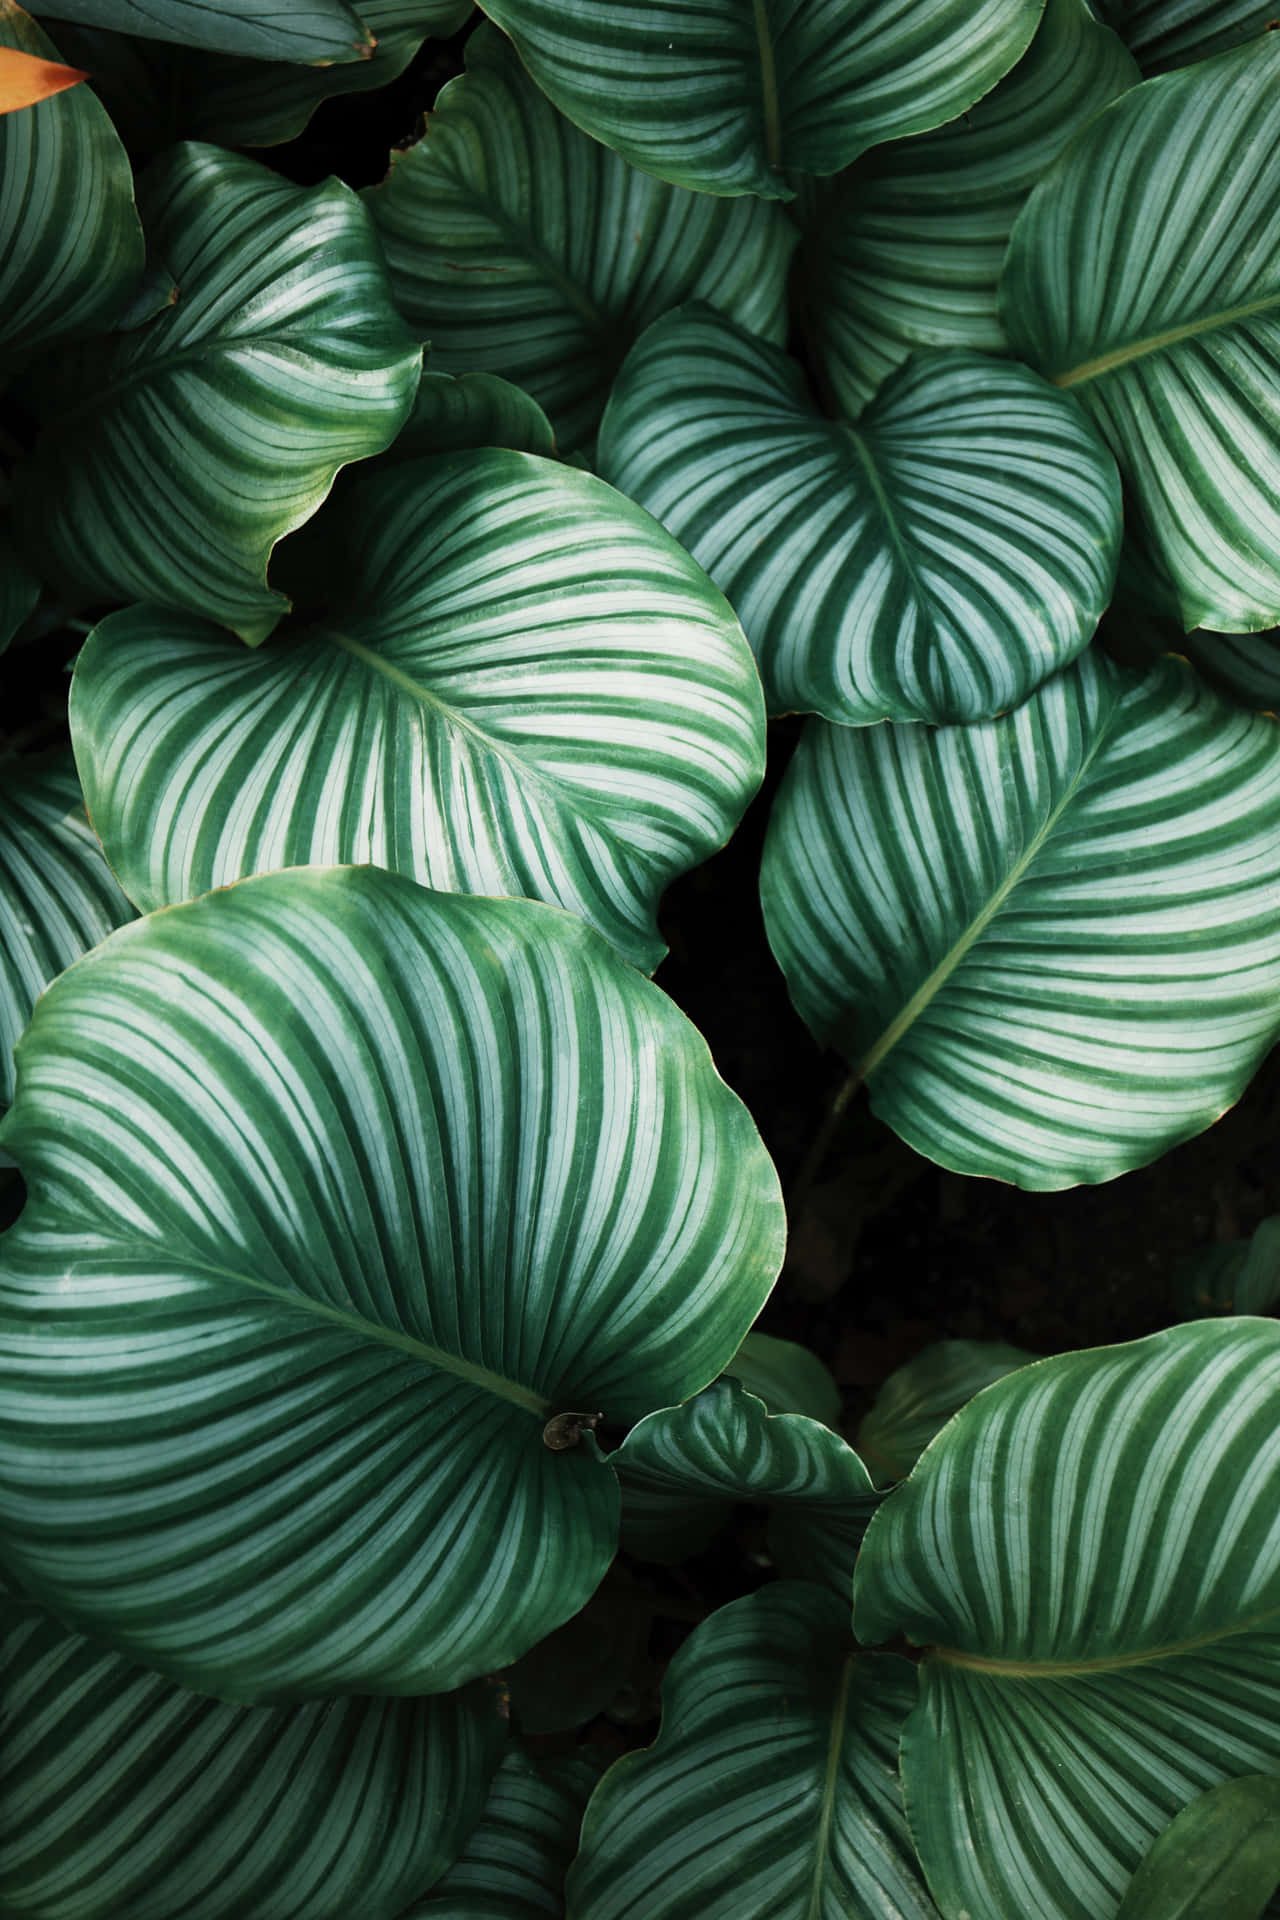 Refresh your Desktop with a Tropical Leaves wallpaper. Wallpaper